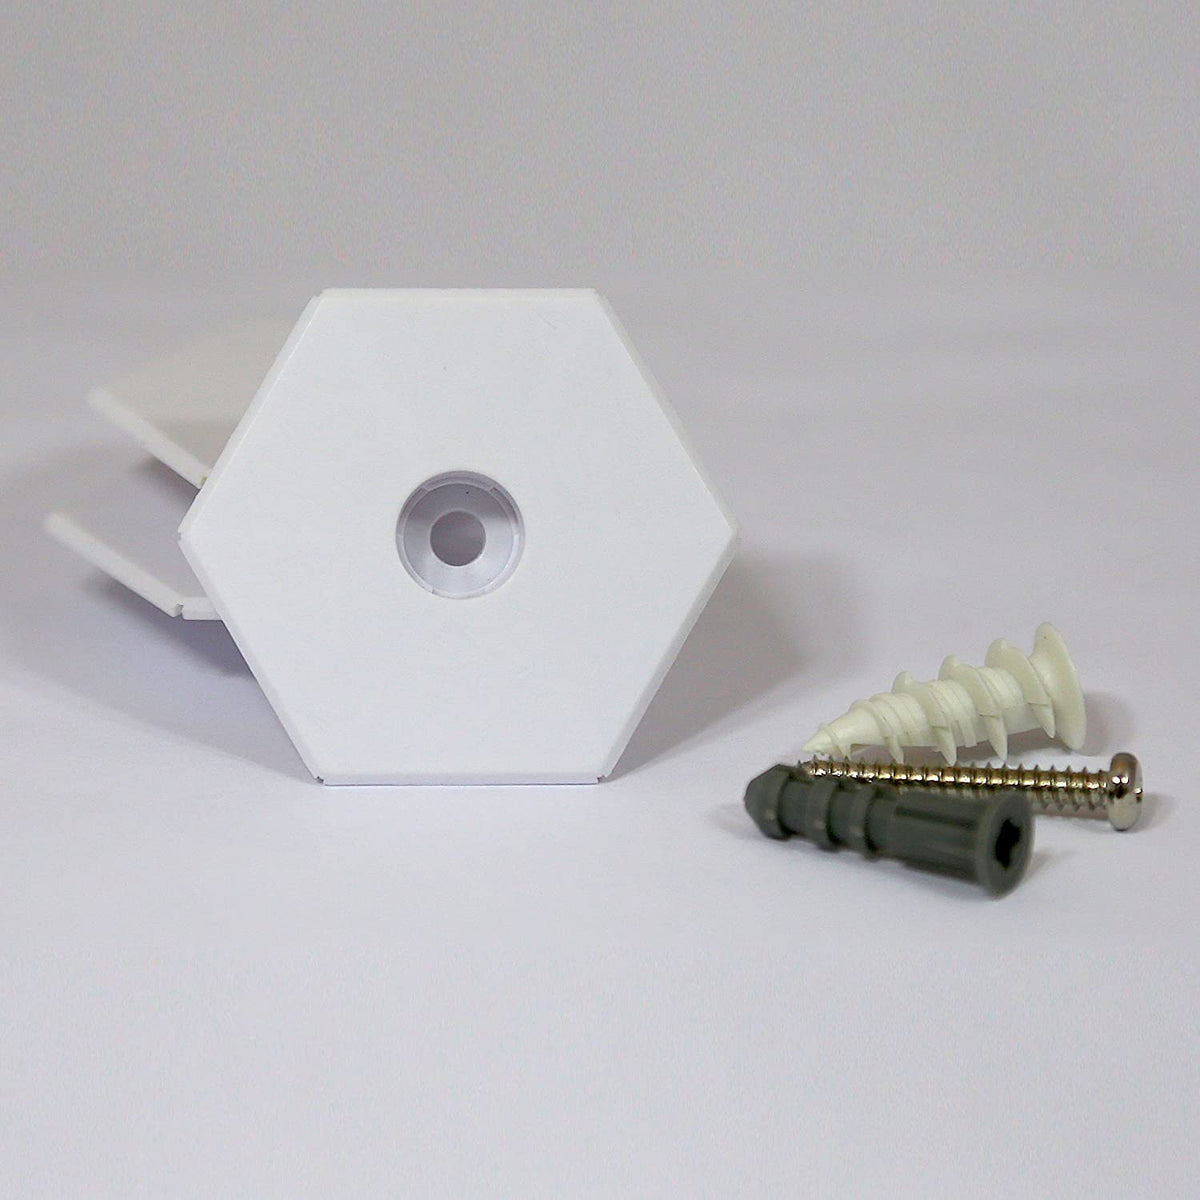 [OPEN BOX] NANOLEAF Mounting Kit for Your Light Panels for Your Ceiling or Uneven/Porous Surface - White